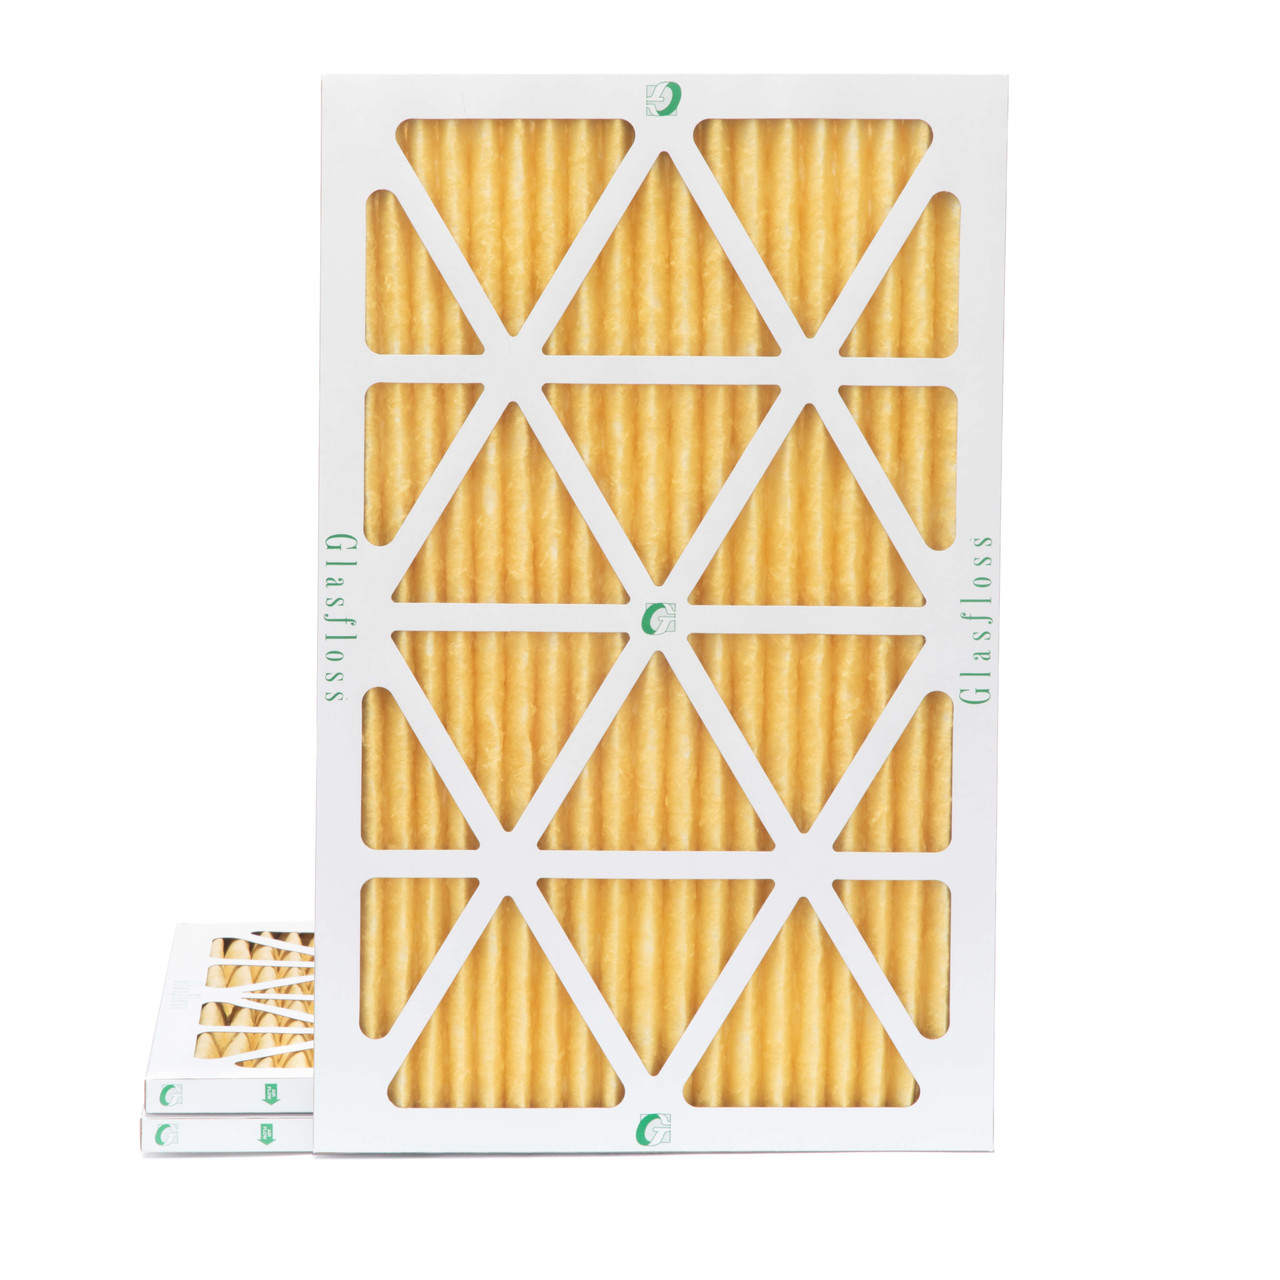 Glasfloss ZL 12x20x1 MERV 11 ( FPR 7 ) Pleated AC Furnace Air Filters. 3  Pack. Exact Size: 11-1/2 x 19-1/2 x 7/8